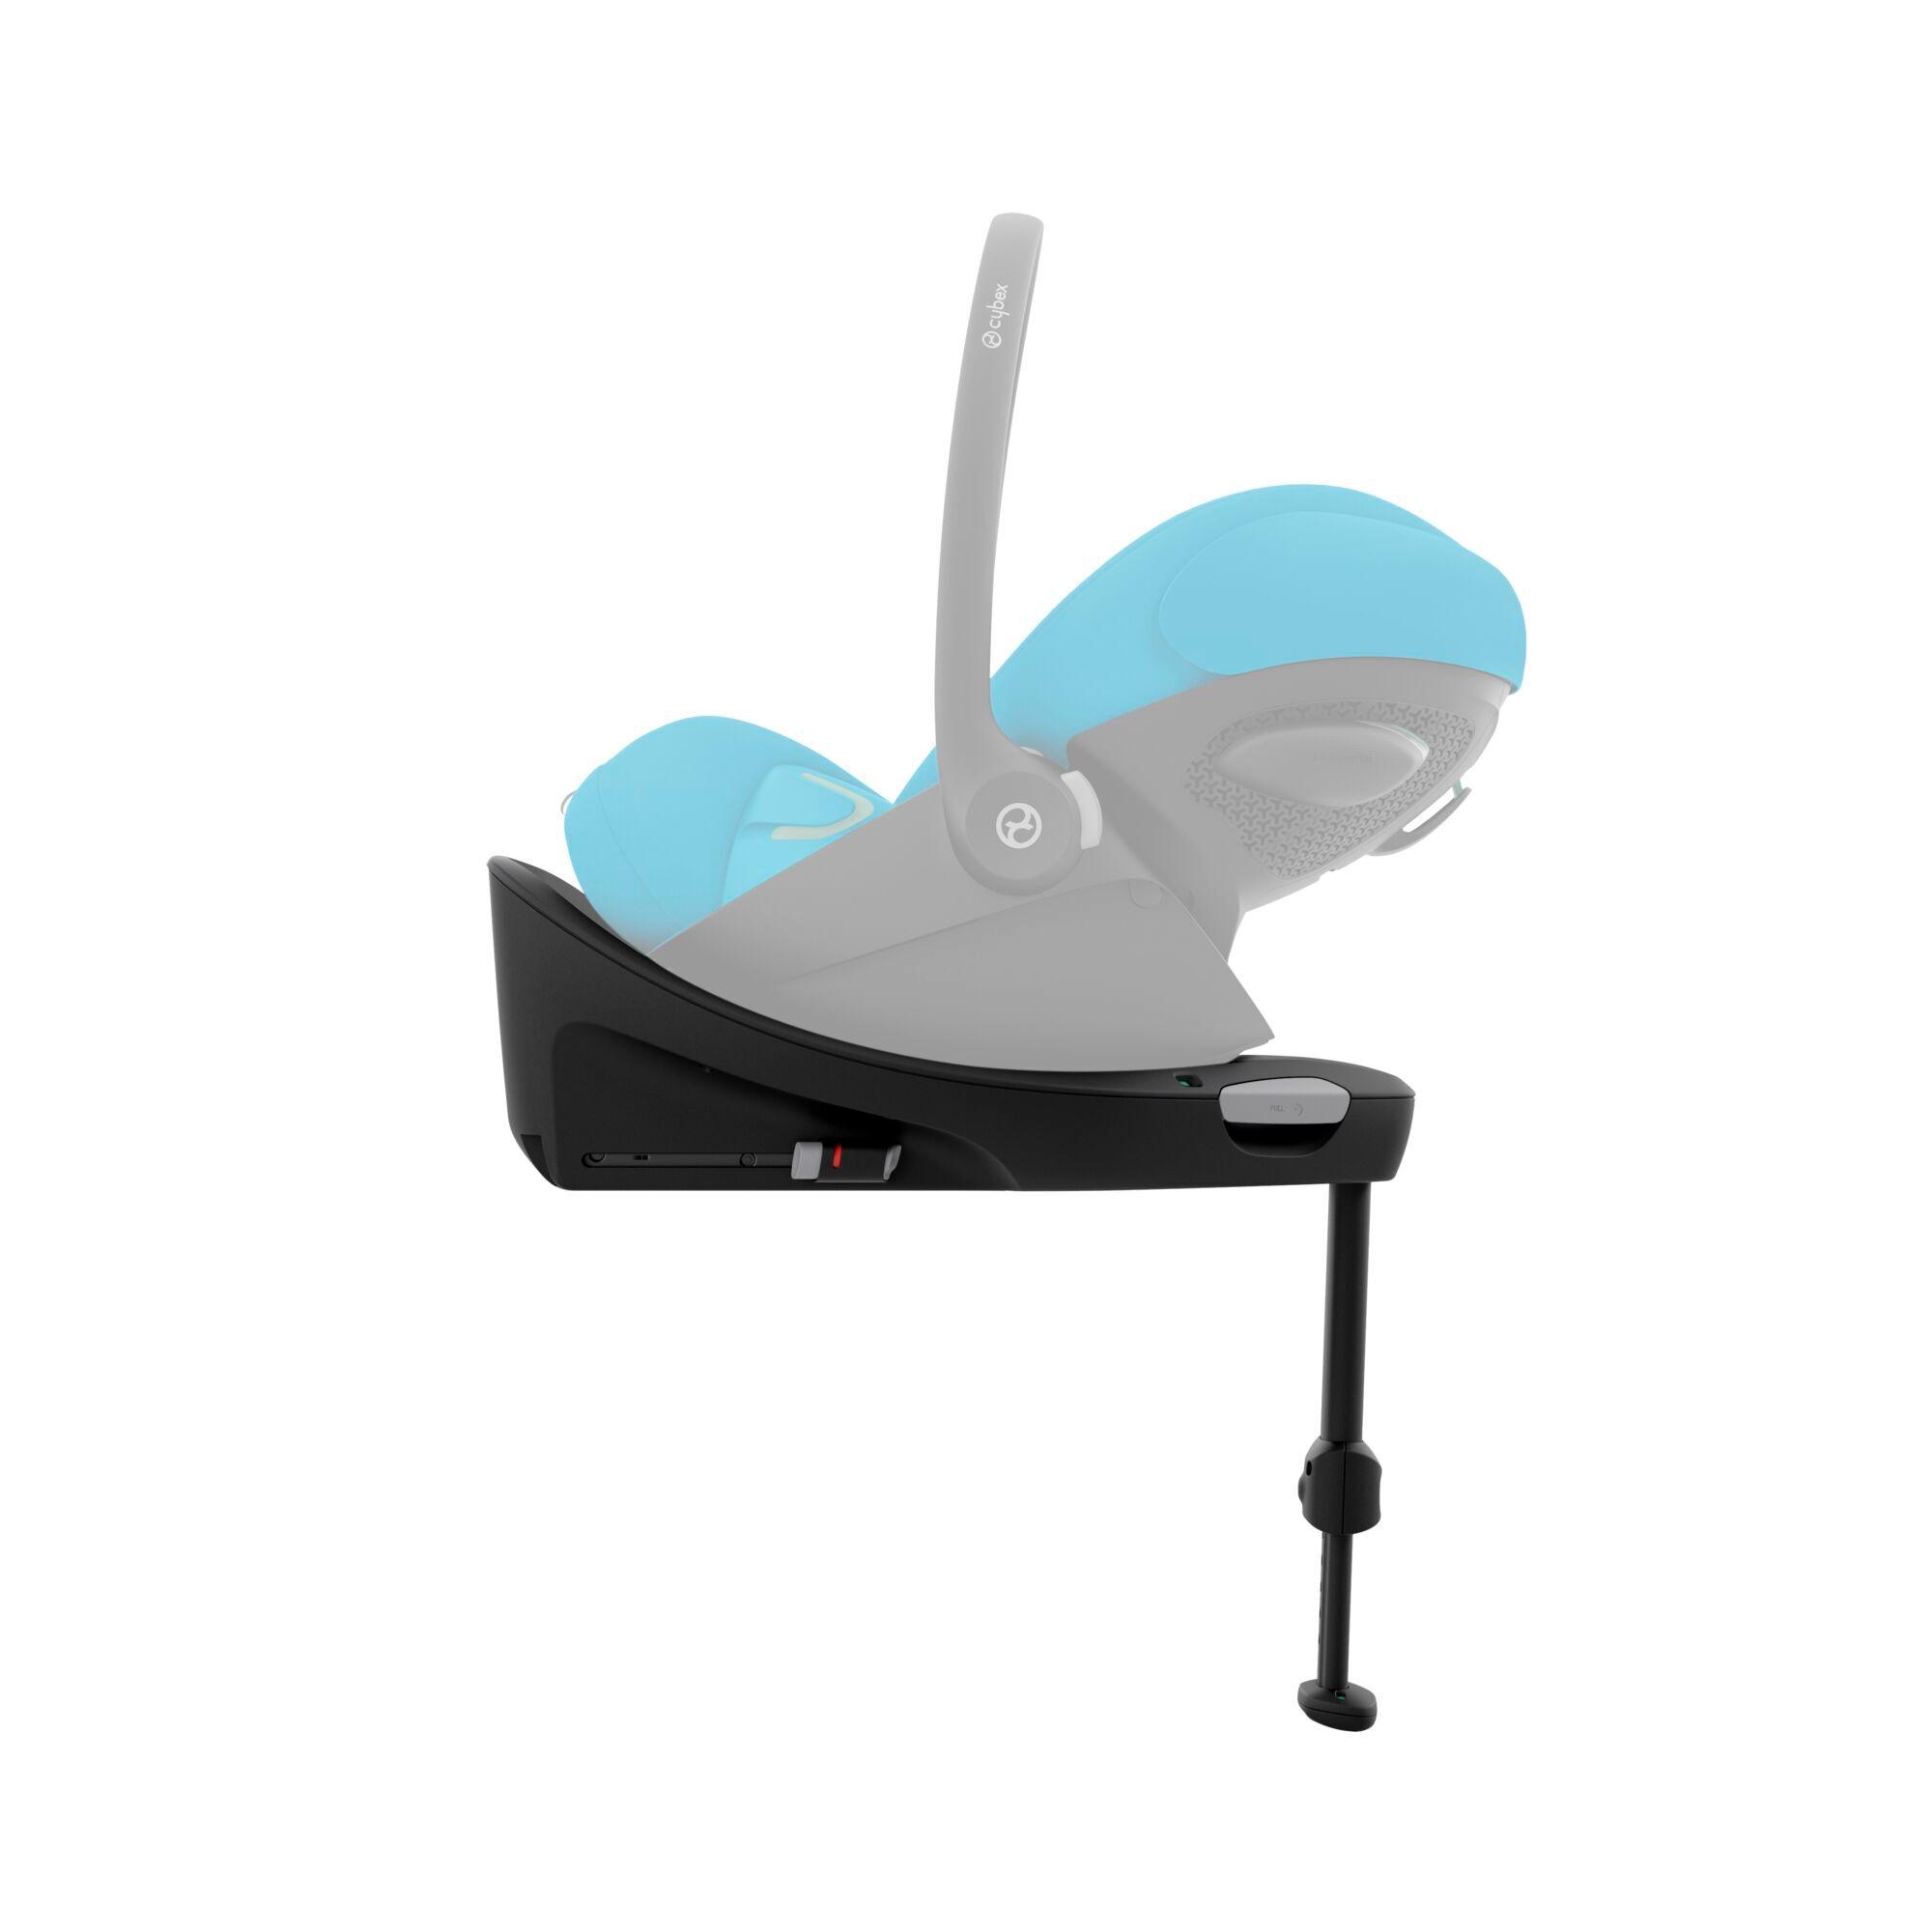 A semi-transparent CYBEX Cloud G car seat in Beach Blue Plus mounted on a black CYBEX Base G Isofix base. The image focuses on the base, showcasing its robust design with Isofix connectors and an extendable support leg, while the car seat's details are muted to emphasize the base.